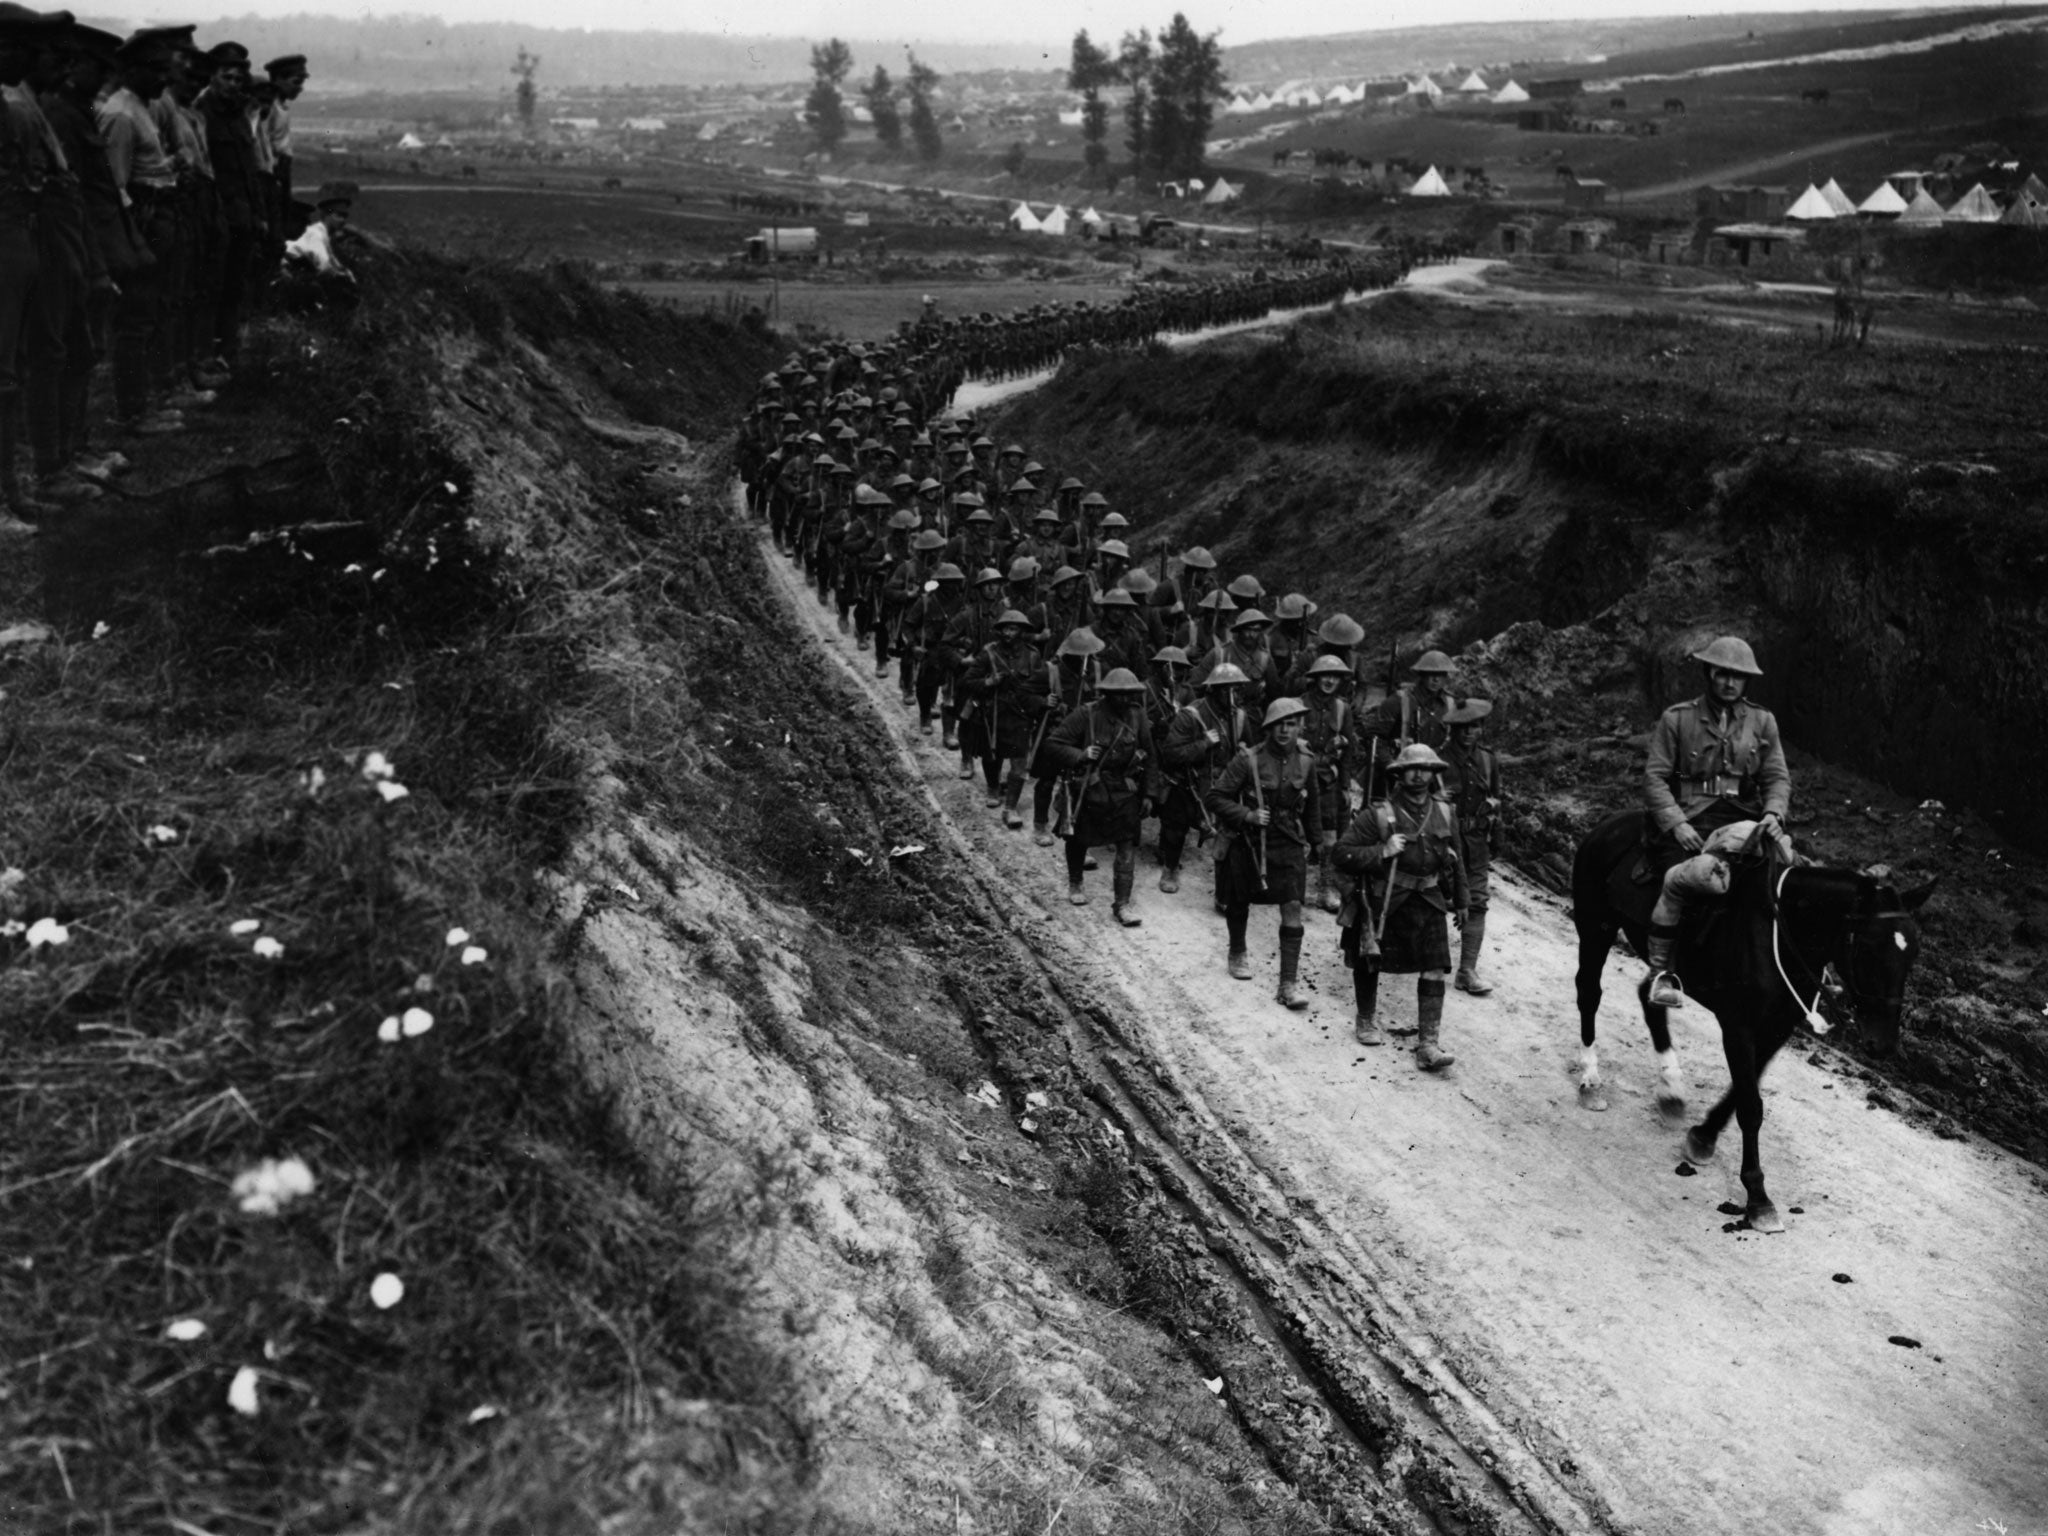 A battalion of the Gordon Highlanders marches towards the Somme trenches